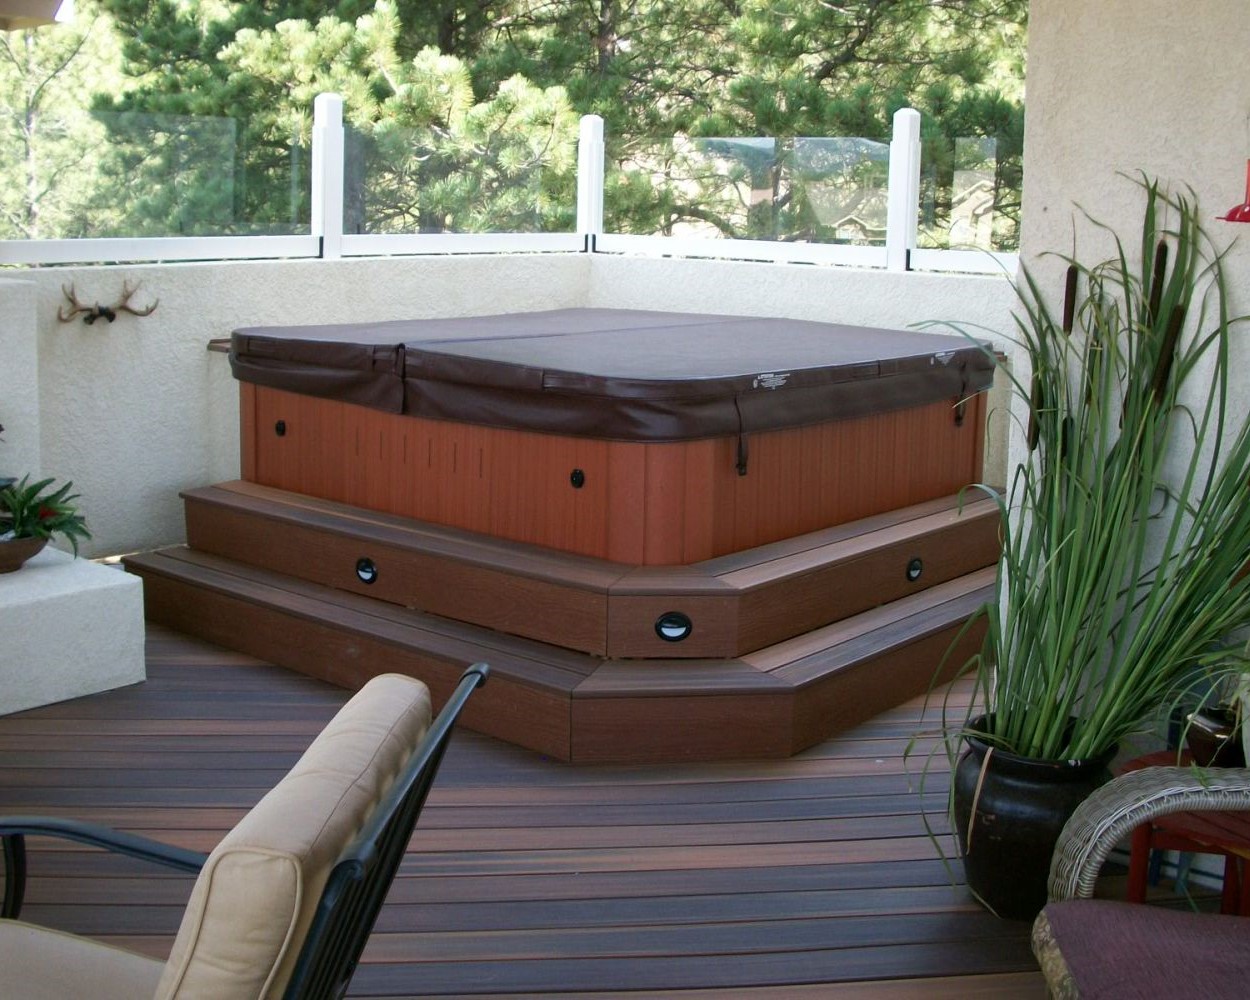 Composite deck with a hot tub in one corner. A stucco-wall features short glass panes on top to act as a windbreak.